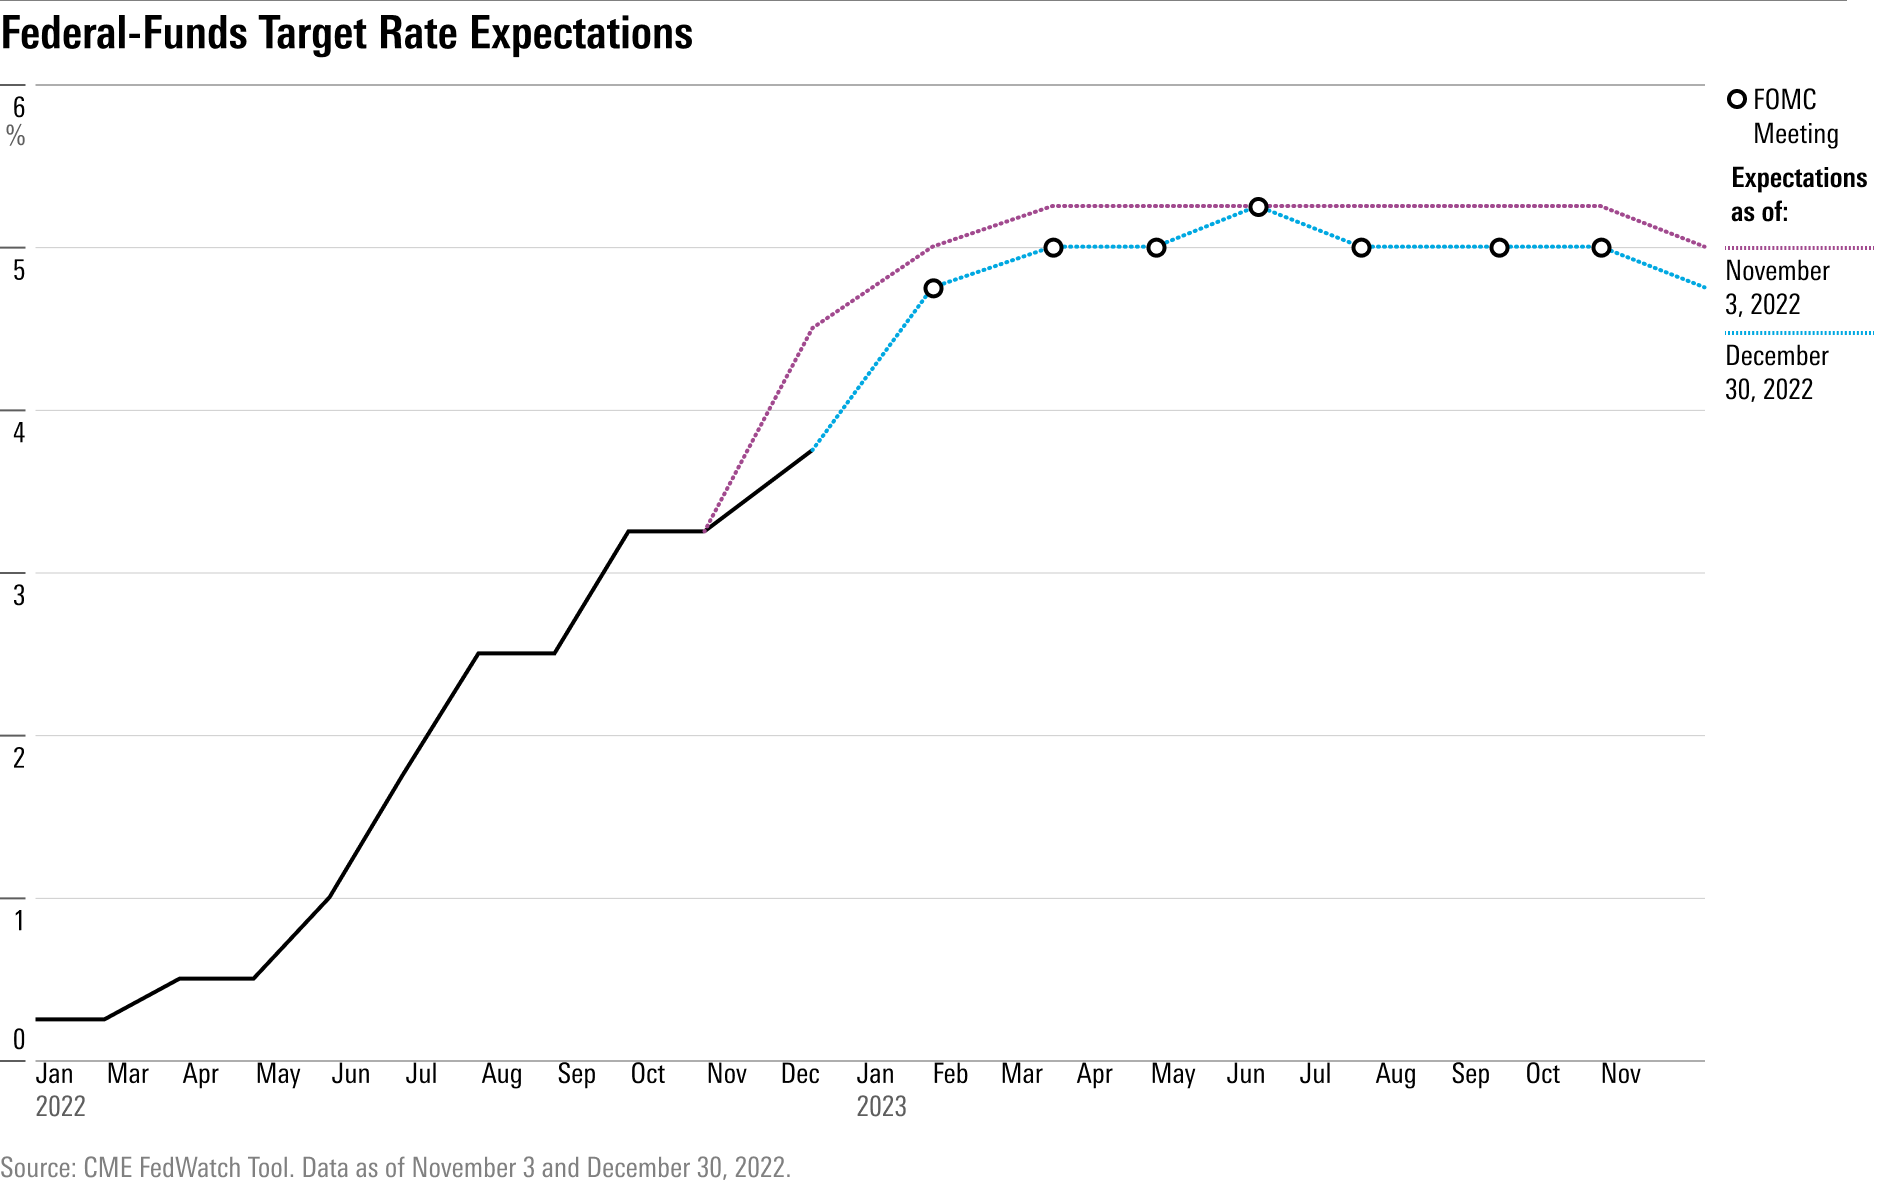 Expectations for the federal-funds effective rate through 2023.